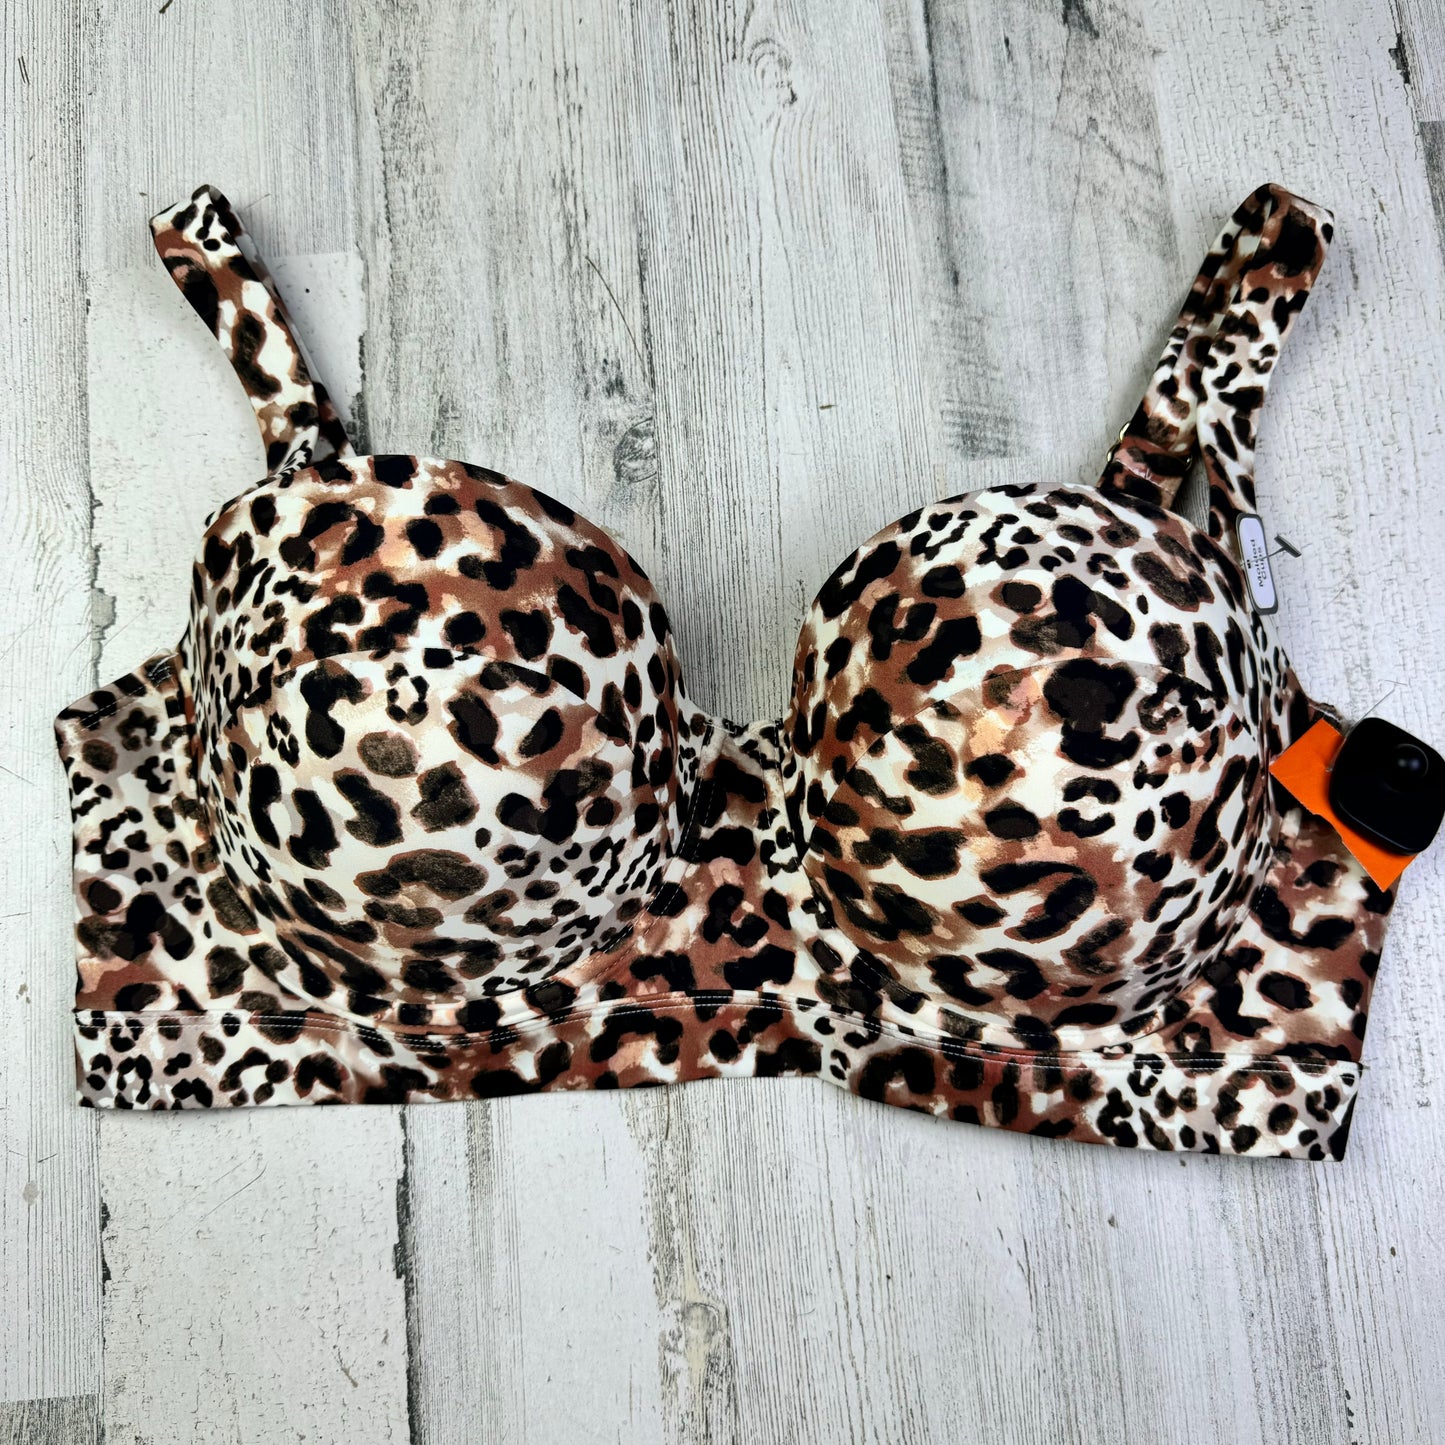 Animal Print Swimsuit Top Time And Tru, Size 2x